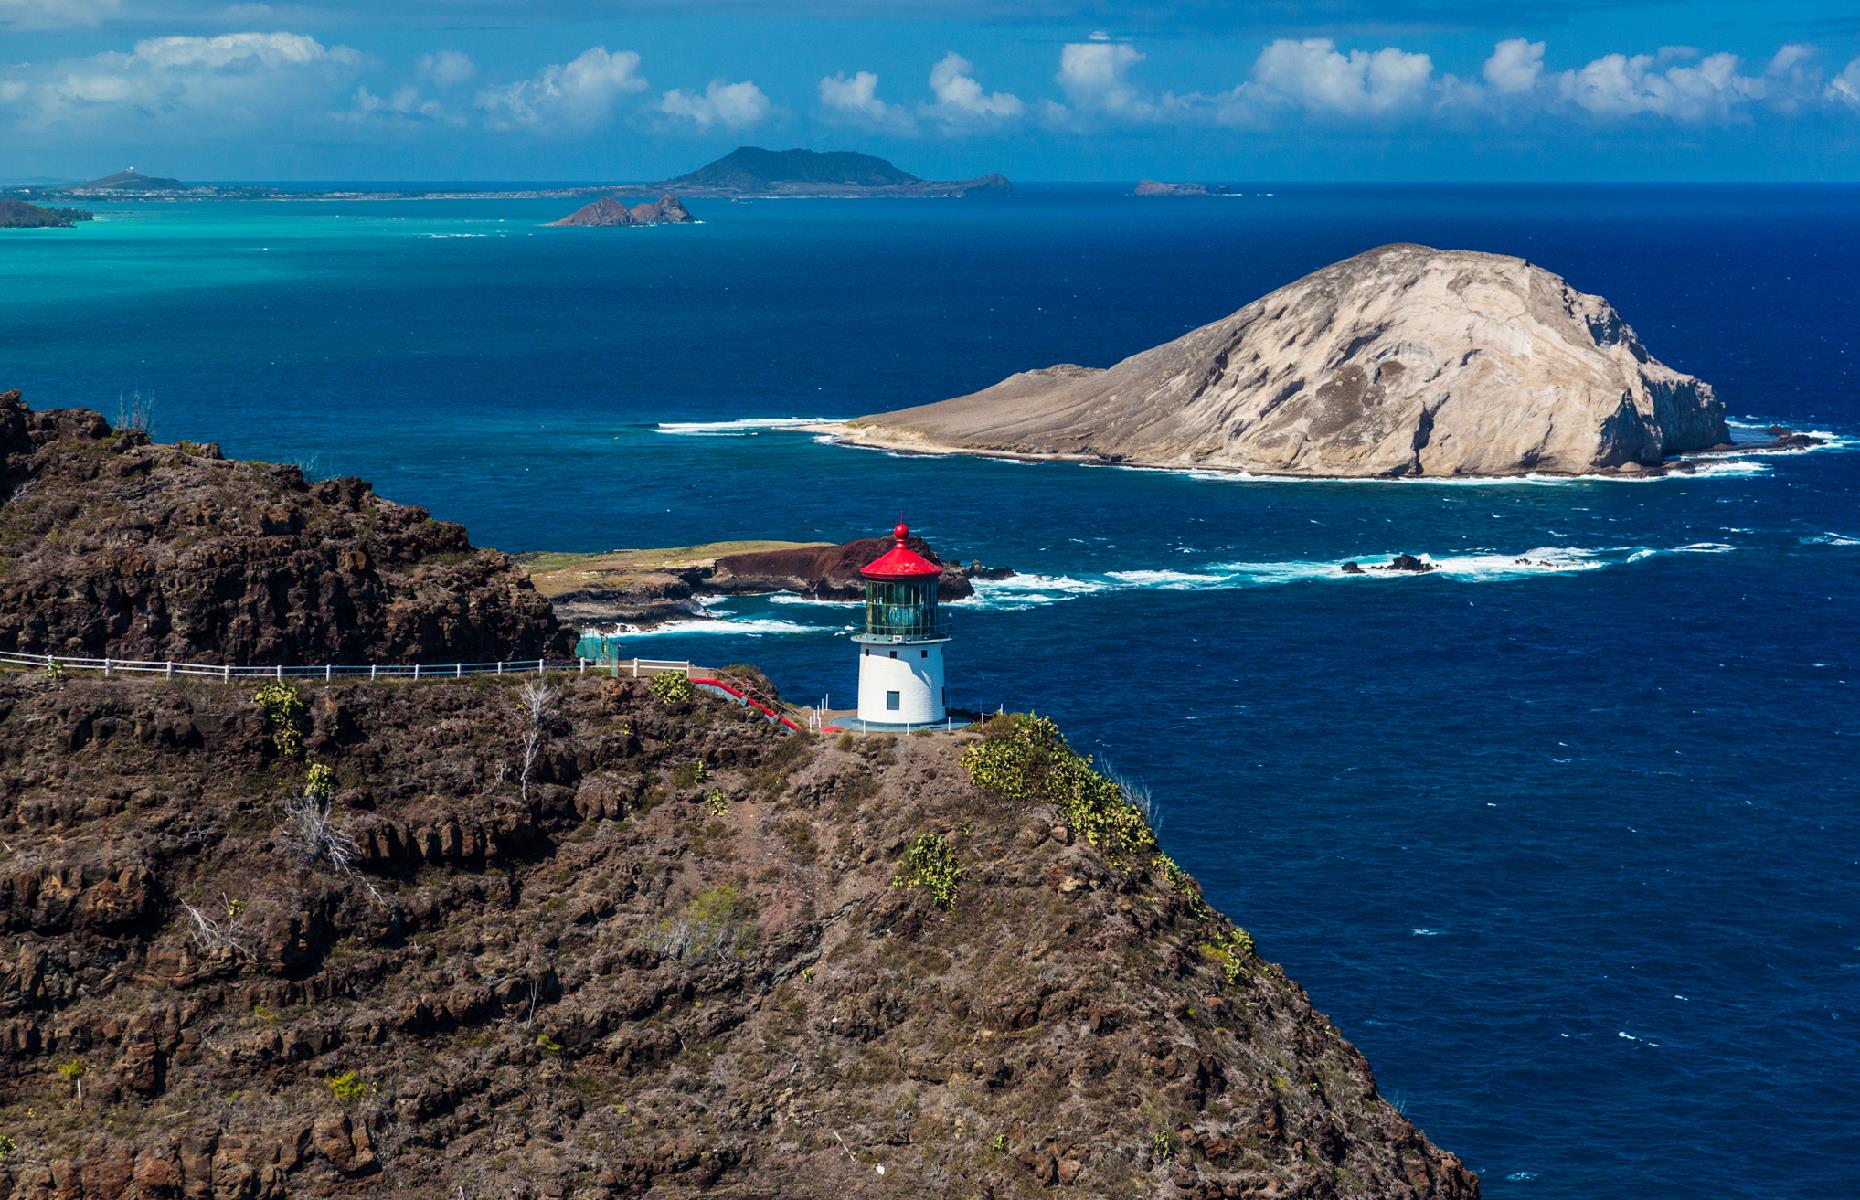 <p>An easy trip from Honolulu is the Makapuu Lighthouse, perched on a cliff on the very eastern tip of Oahu. It dates to the early 20th century and can be taken in on a straightforward two-mile (3km) hike along a paved trail. Pause at the many lookout points to soak in the handsome lighthouse and make out the isle of Molokai in the far distance. </p>  <p><a href="https://www.loveexploring.com/galleries/87044/americas-most-beautiful-lighthouses-you-can-visit?page=1"><strong>See more of America's most beautiful lighthouses here</strong></a></p>